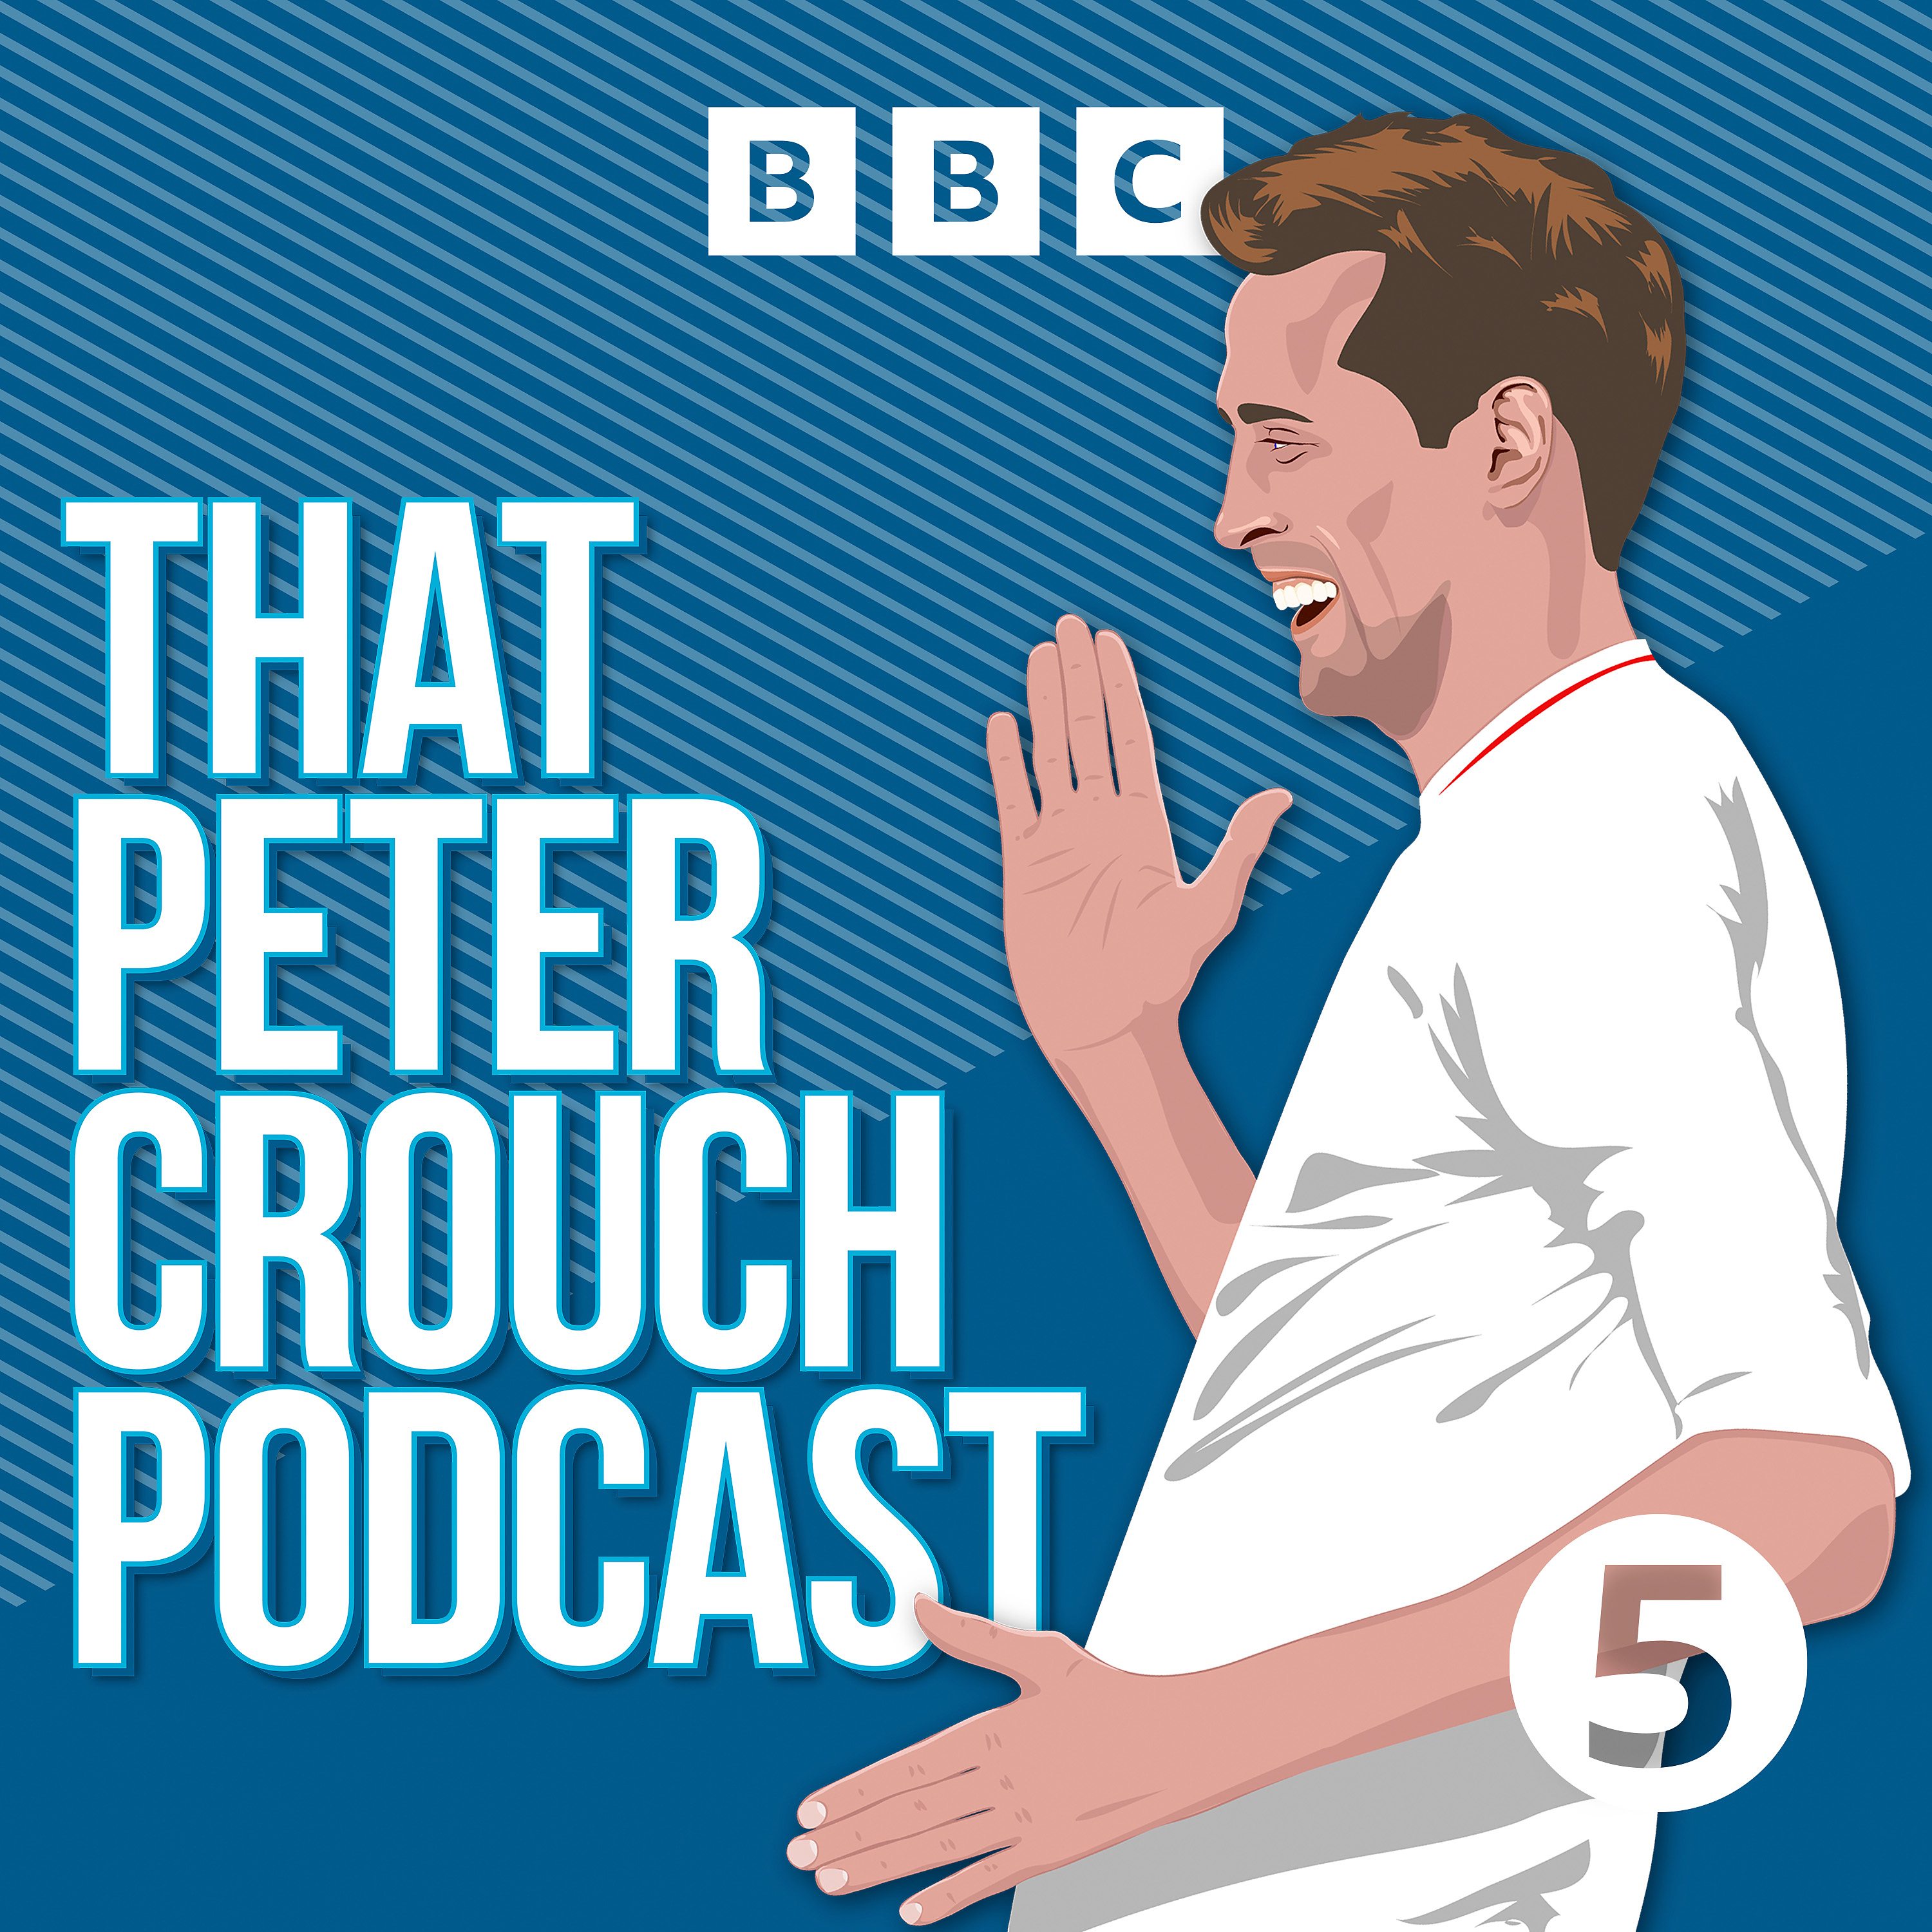 That Peter Crouch Podcast podcast show image